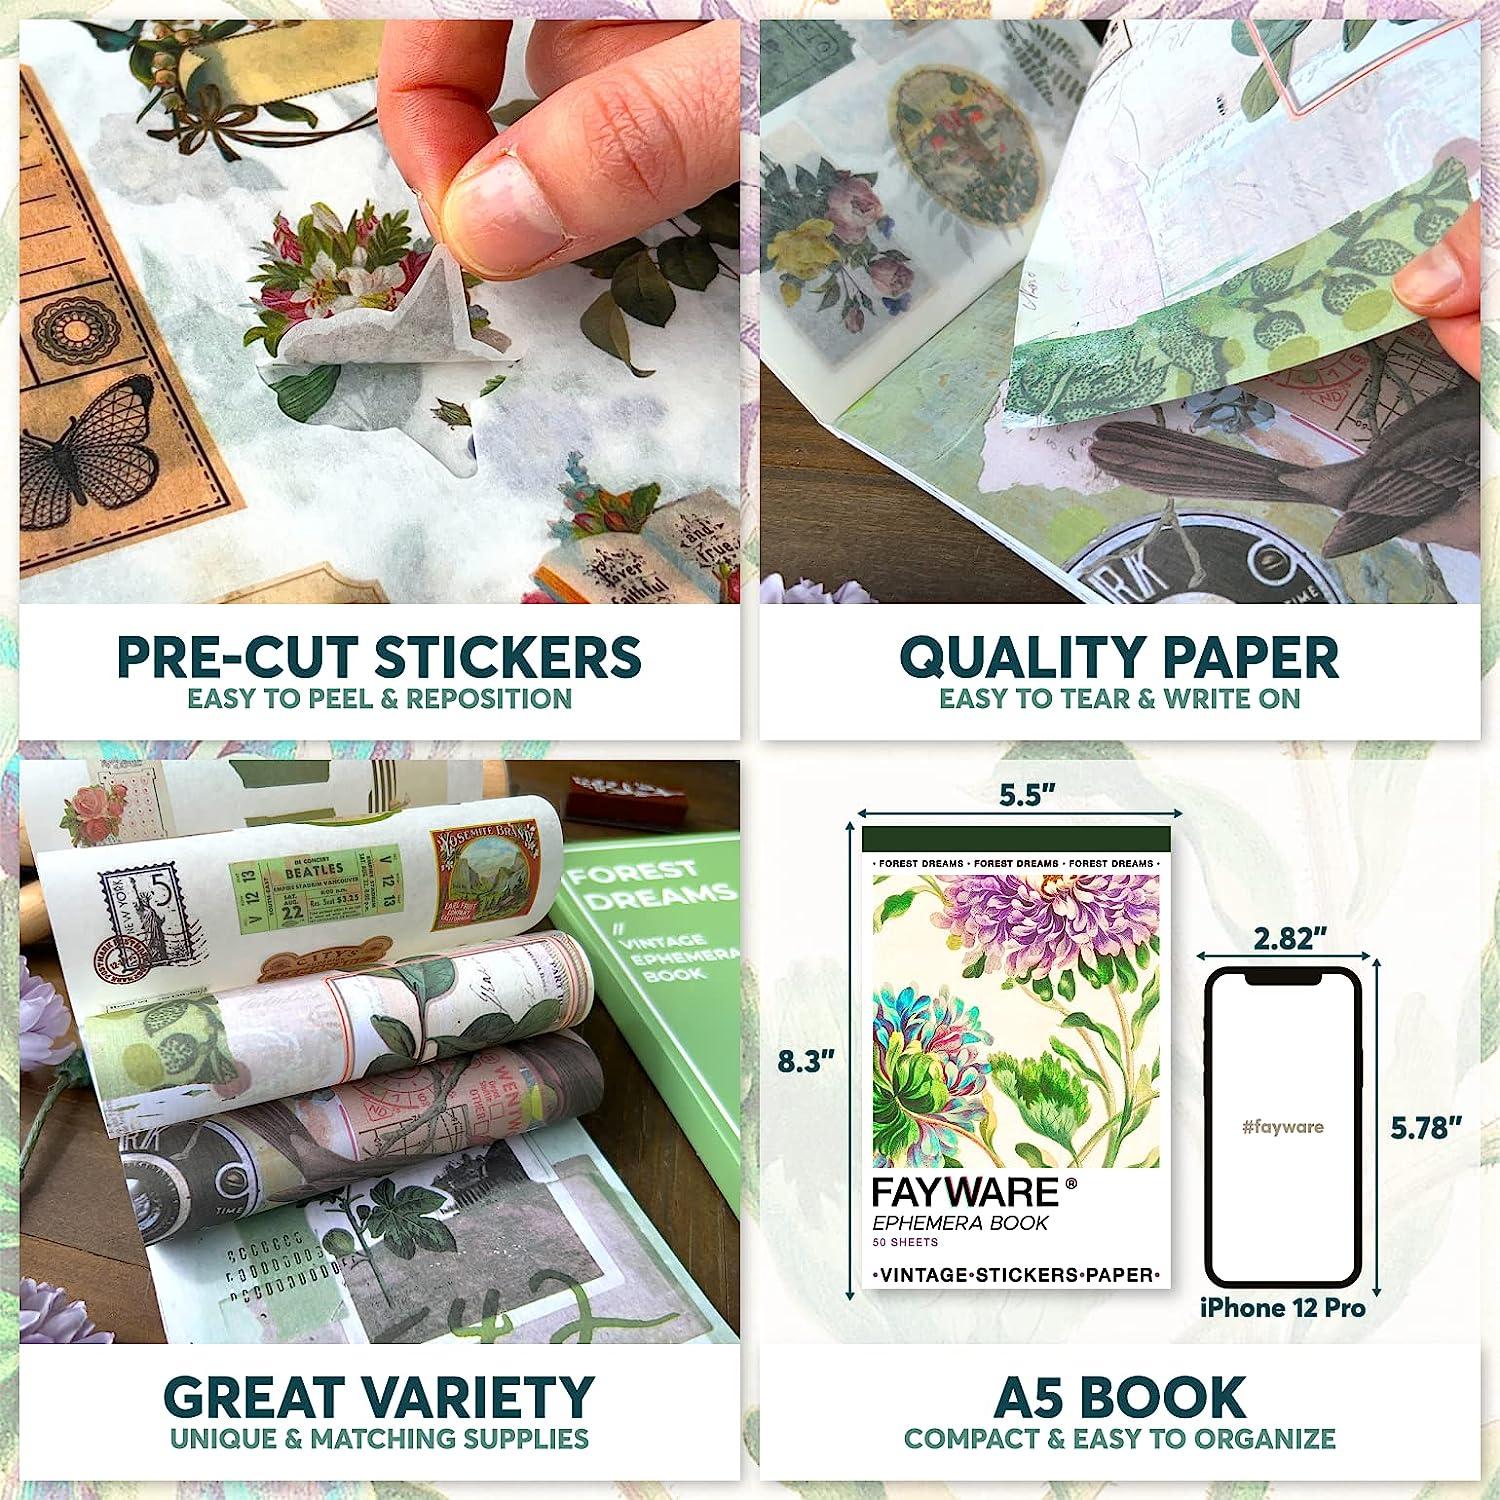 Vintage Washi Stickers for Scrapbooking, Aesthetic Sticker Book for Journaling with 30 Sheets Scrapbook Stickers and 20 Sheets Scrapbook Papers for